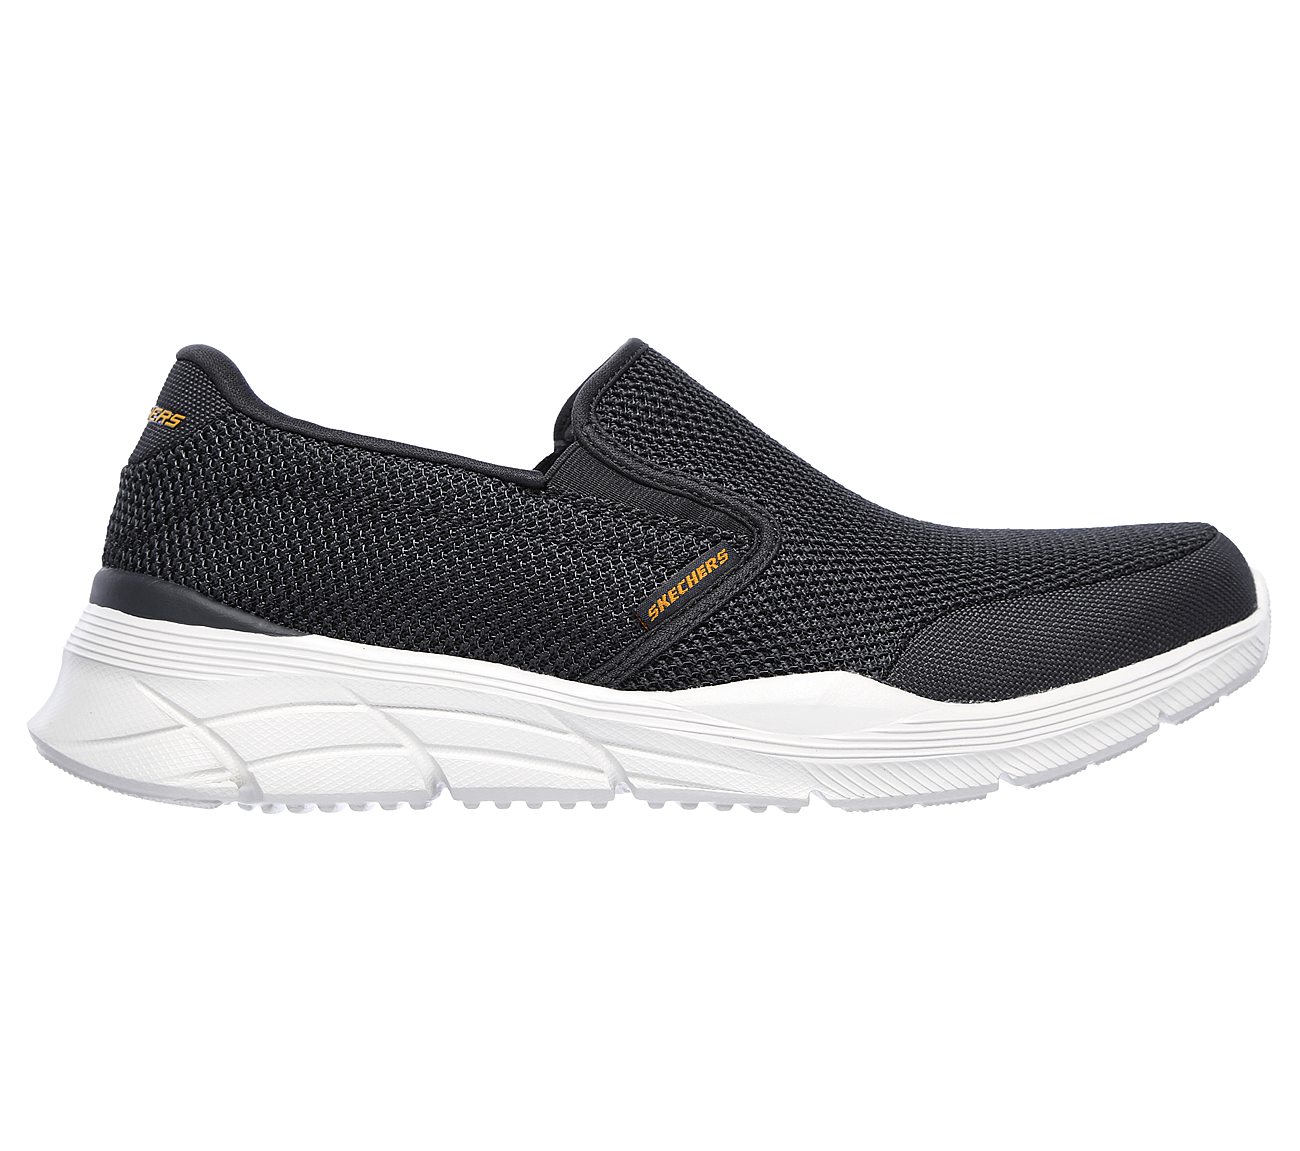 Buy SKECHERS Relaxed Fit: Equalizer 4.0 - Krimlin EXTRA WIDE FIT Sport ...